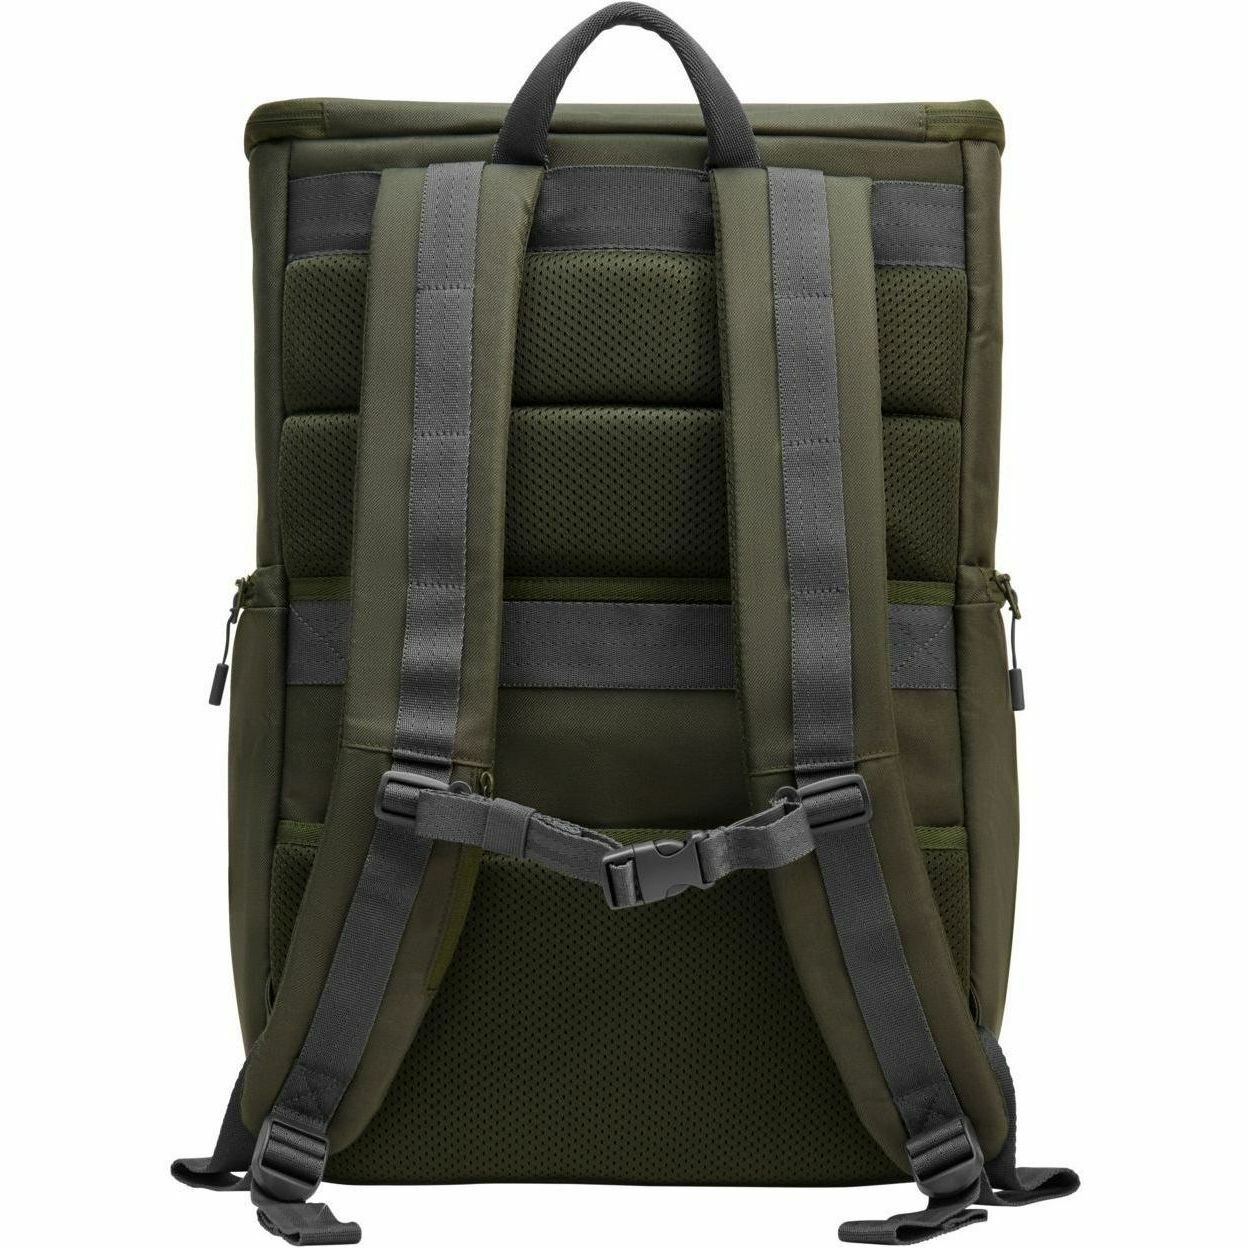 HP Carrying Case (Backpack) for 15.6" Notebook - Gray, Green